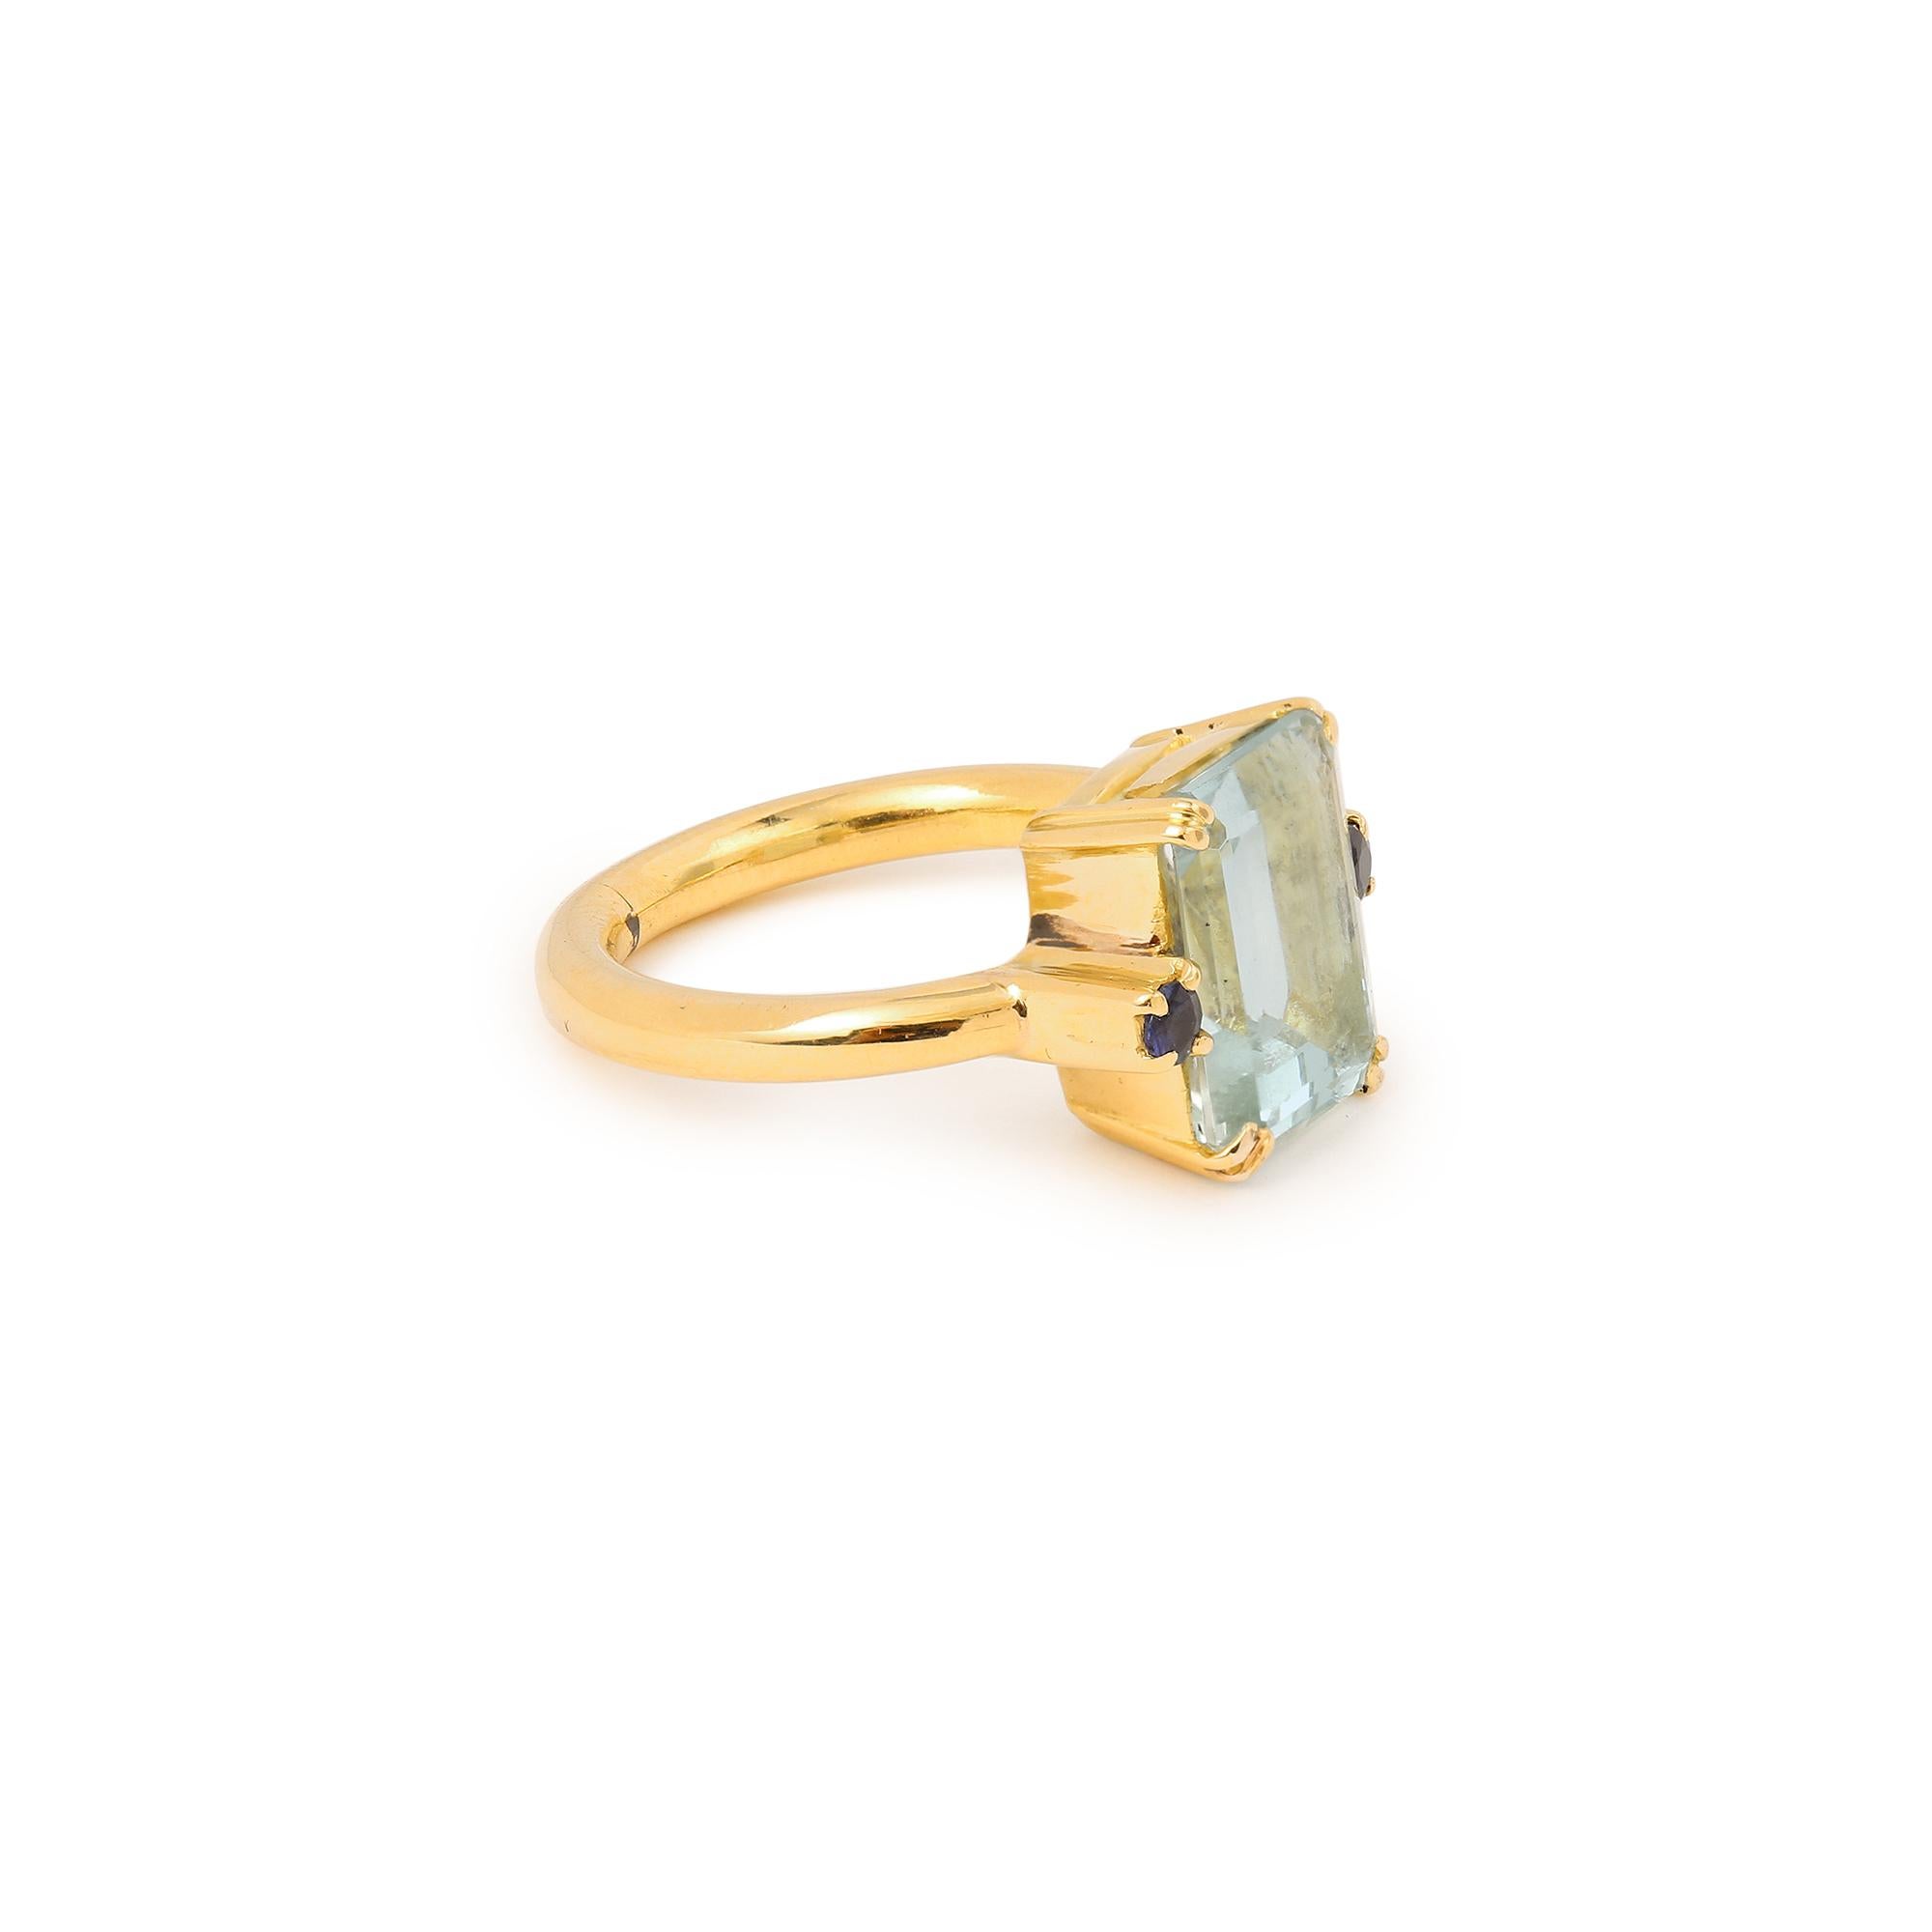 Yellow gold ring set with a rectangular aquamarine adorned with small sapphires on both sides.

Estimated weight of the aquamarine: 4.30 carats

Ring size: 12.46 x 14.35 x 6.30 mm ( 0.490 x 0.565 x 0.249 inch)

Finger size : 50.5 (US size :